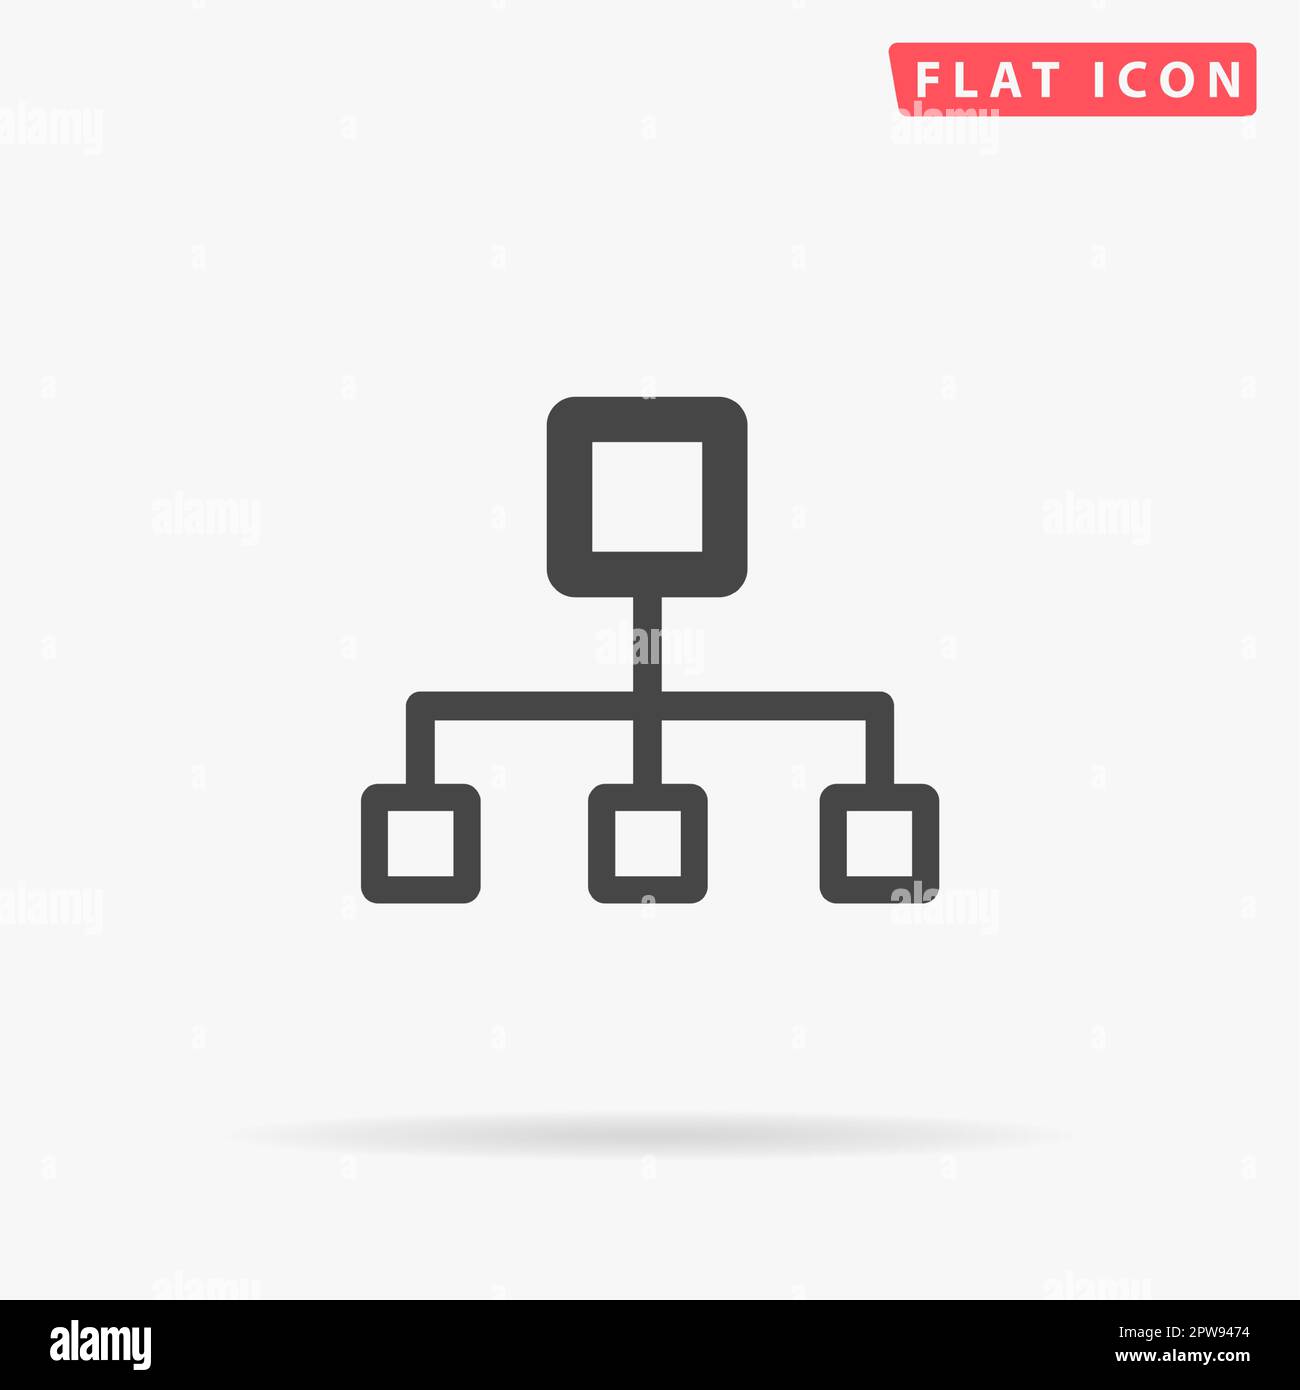 Network block diagram. Simple flat black symbol with shadow on white background. Vector illustration pictogram Stock Vector